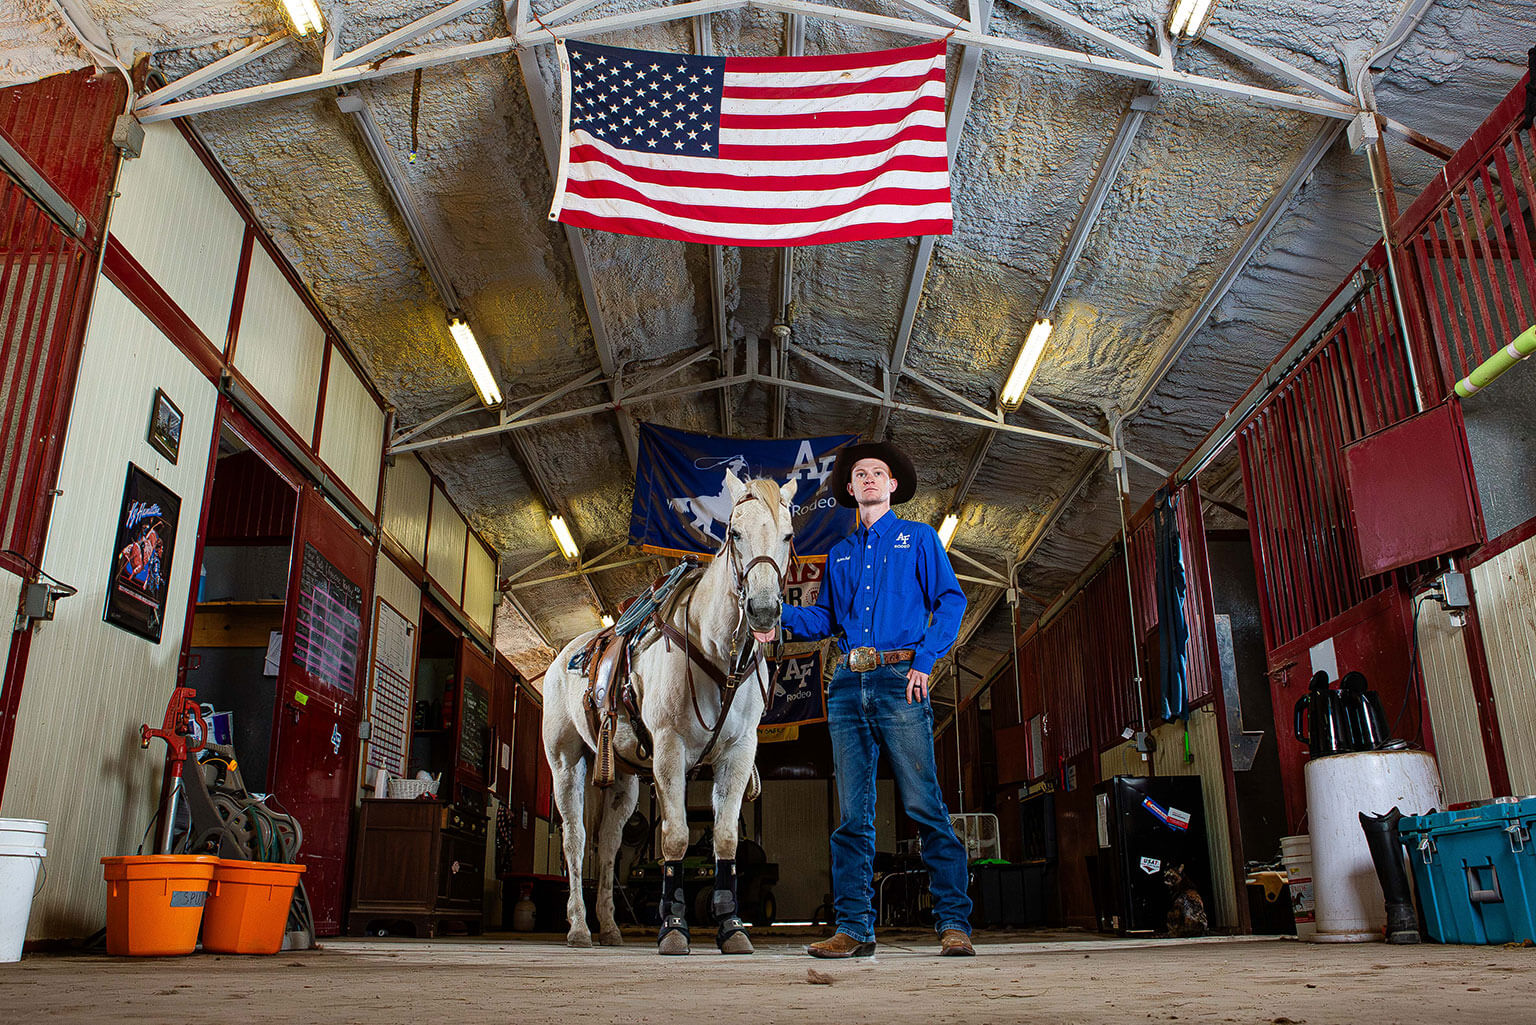 Cadet 1st Class Robert Ball poses with his horse, Ferg, out of the U.S. Air Force Academy Rodeo Club barn.